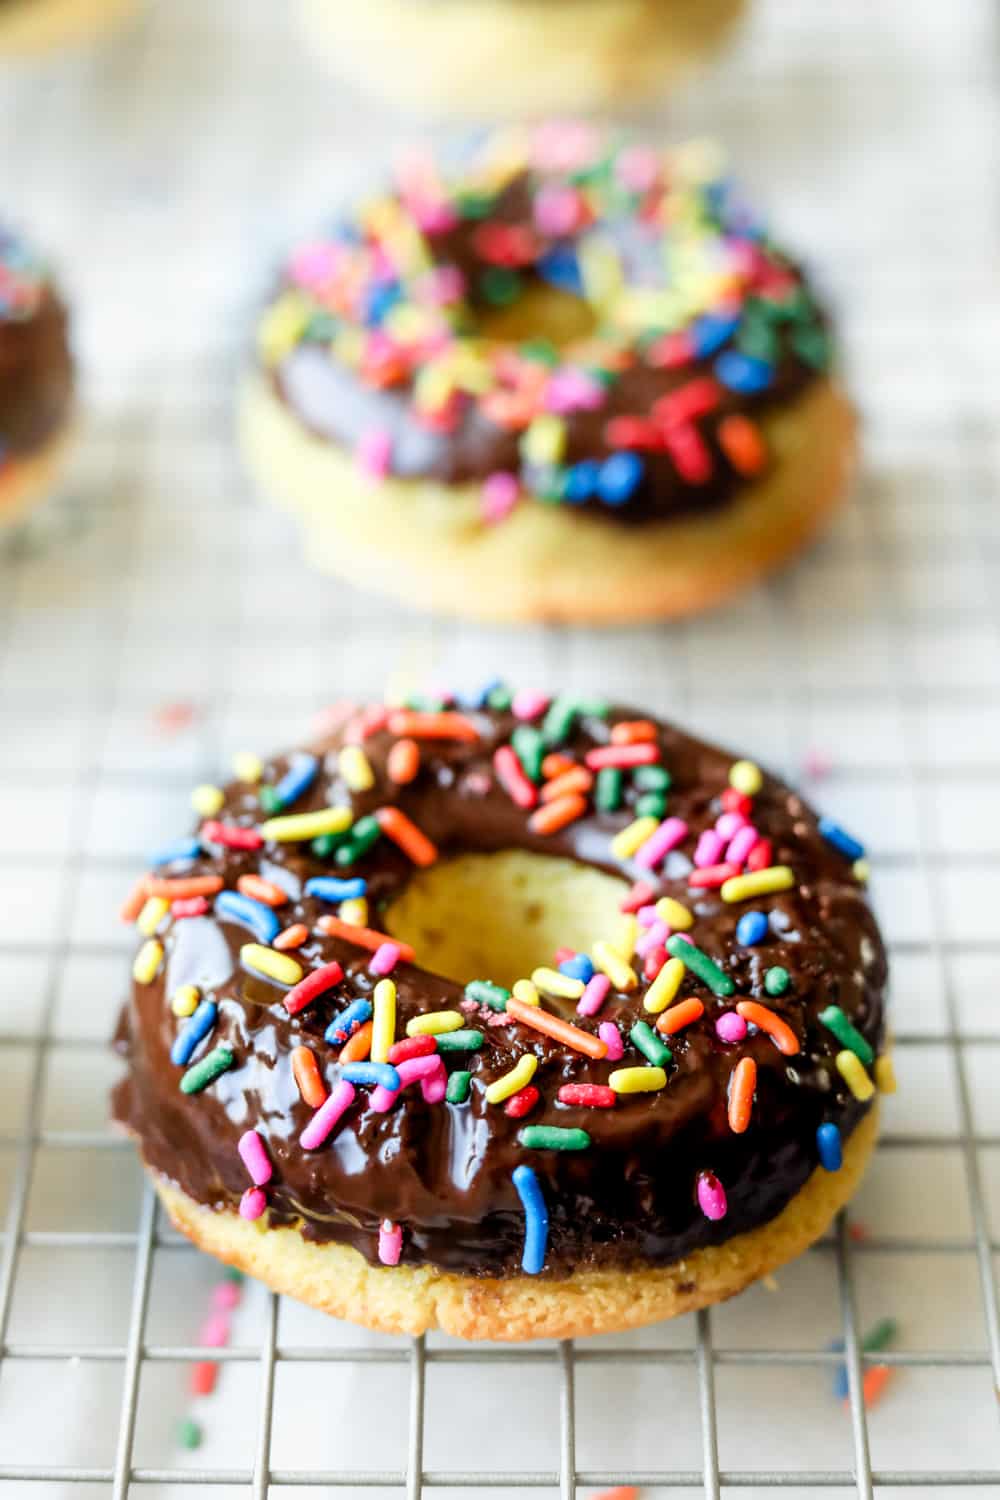 Vanilla donuts that I've been dipped in chocolate and covered in multicolored sprinkles on the silverware rack.